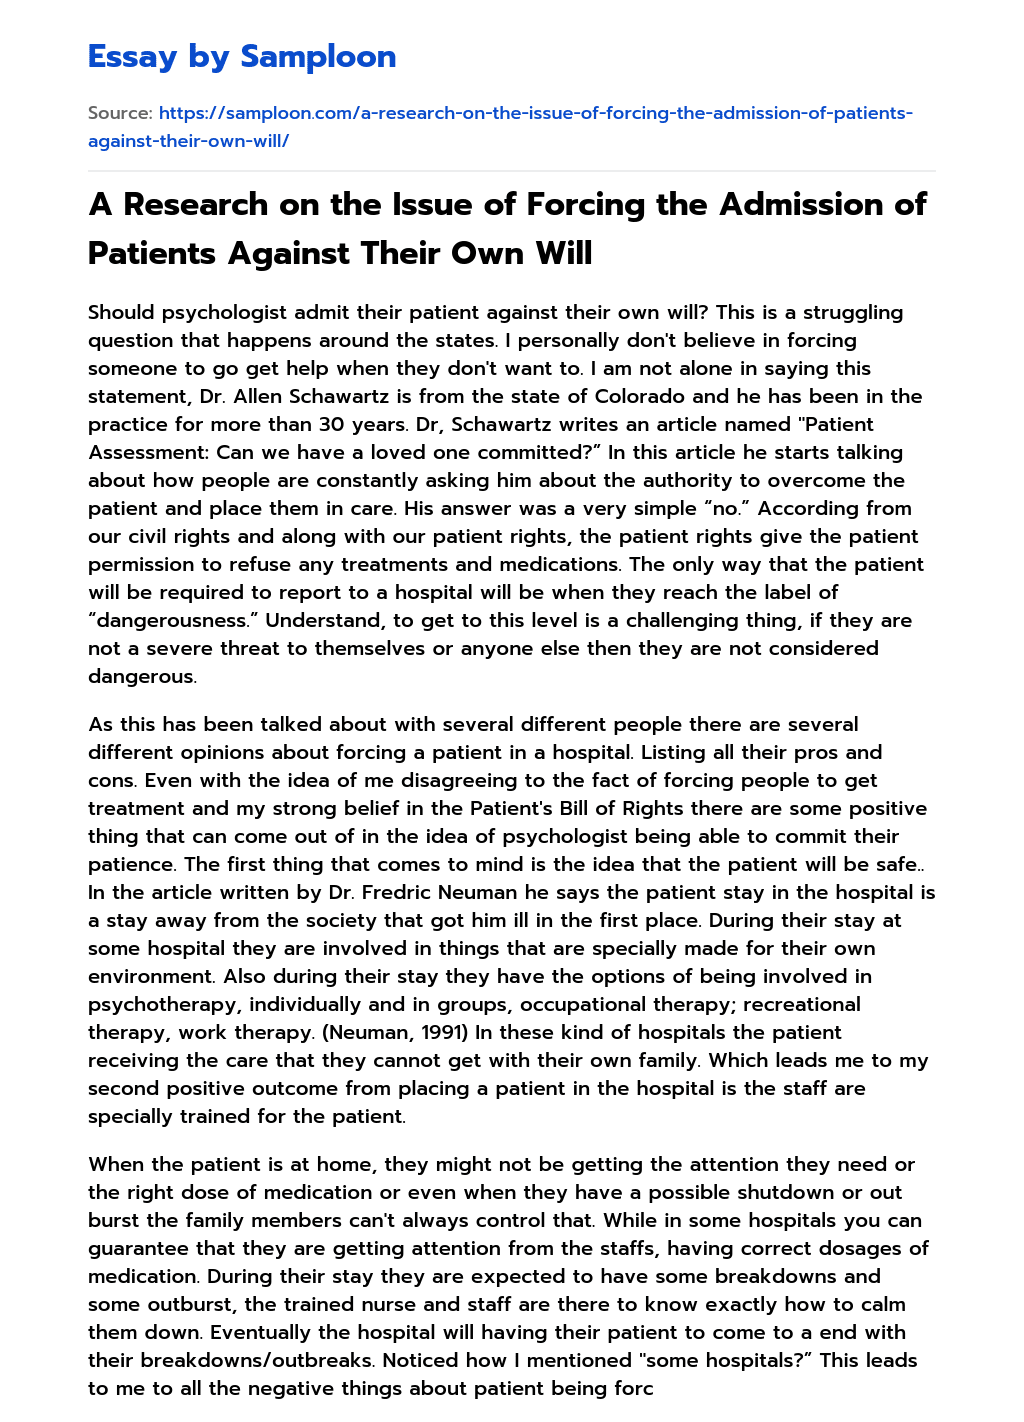 A Research on the Issue of Forcing the Admission of Patients Against Their Own Will essay